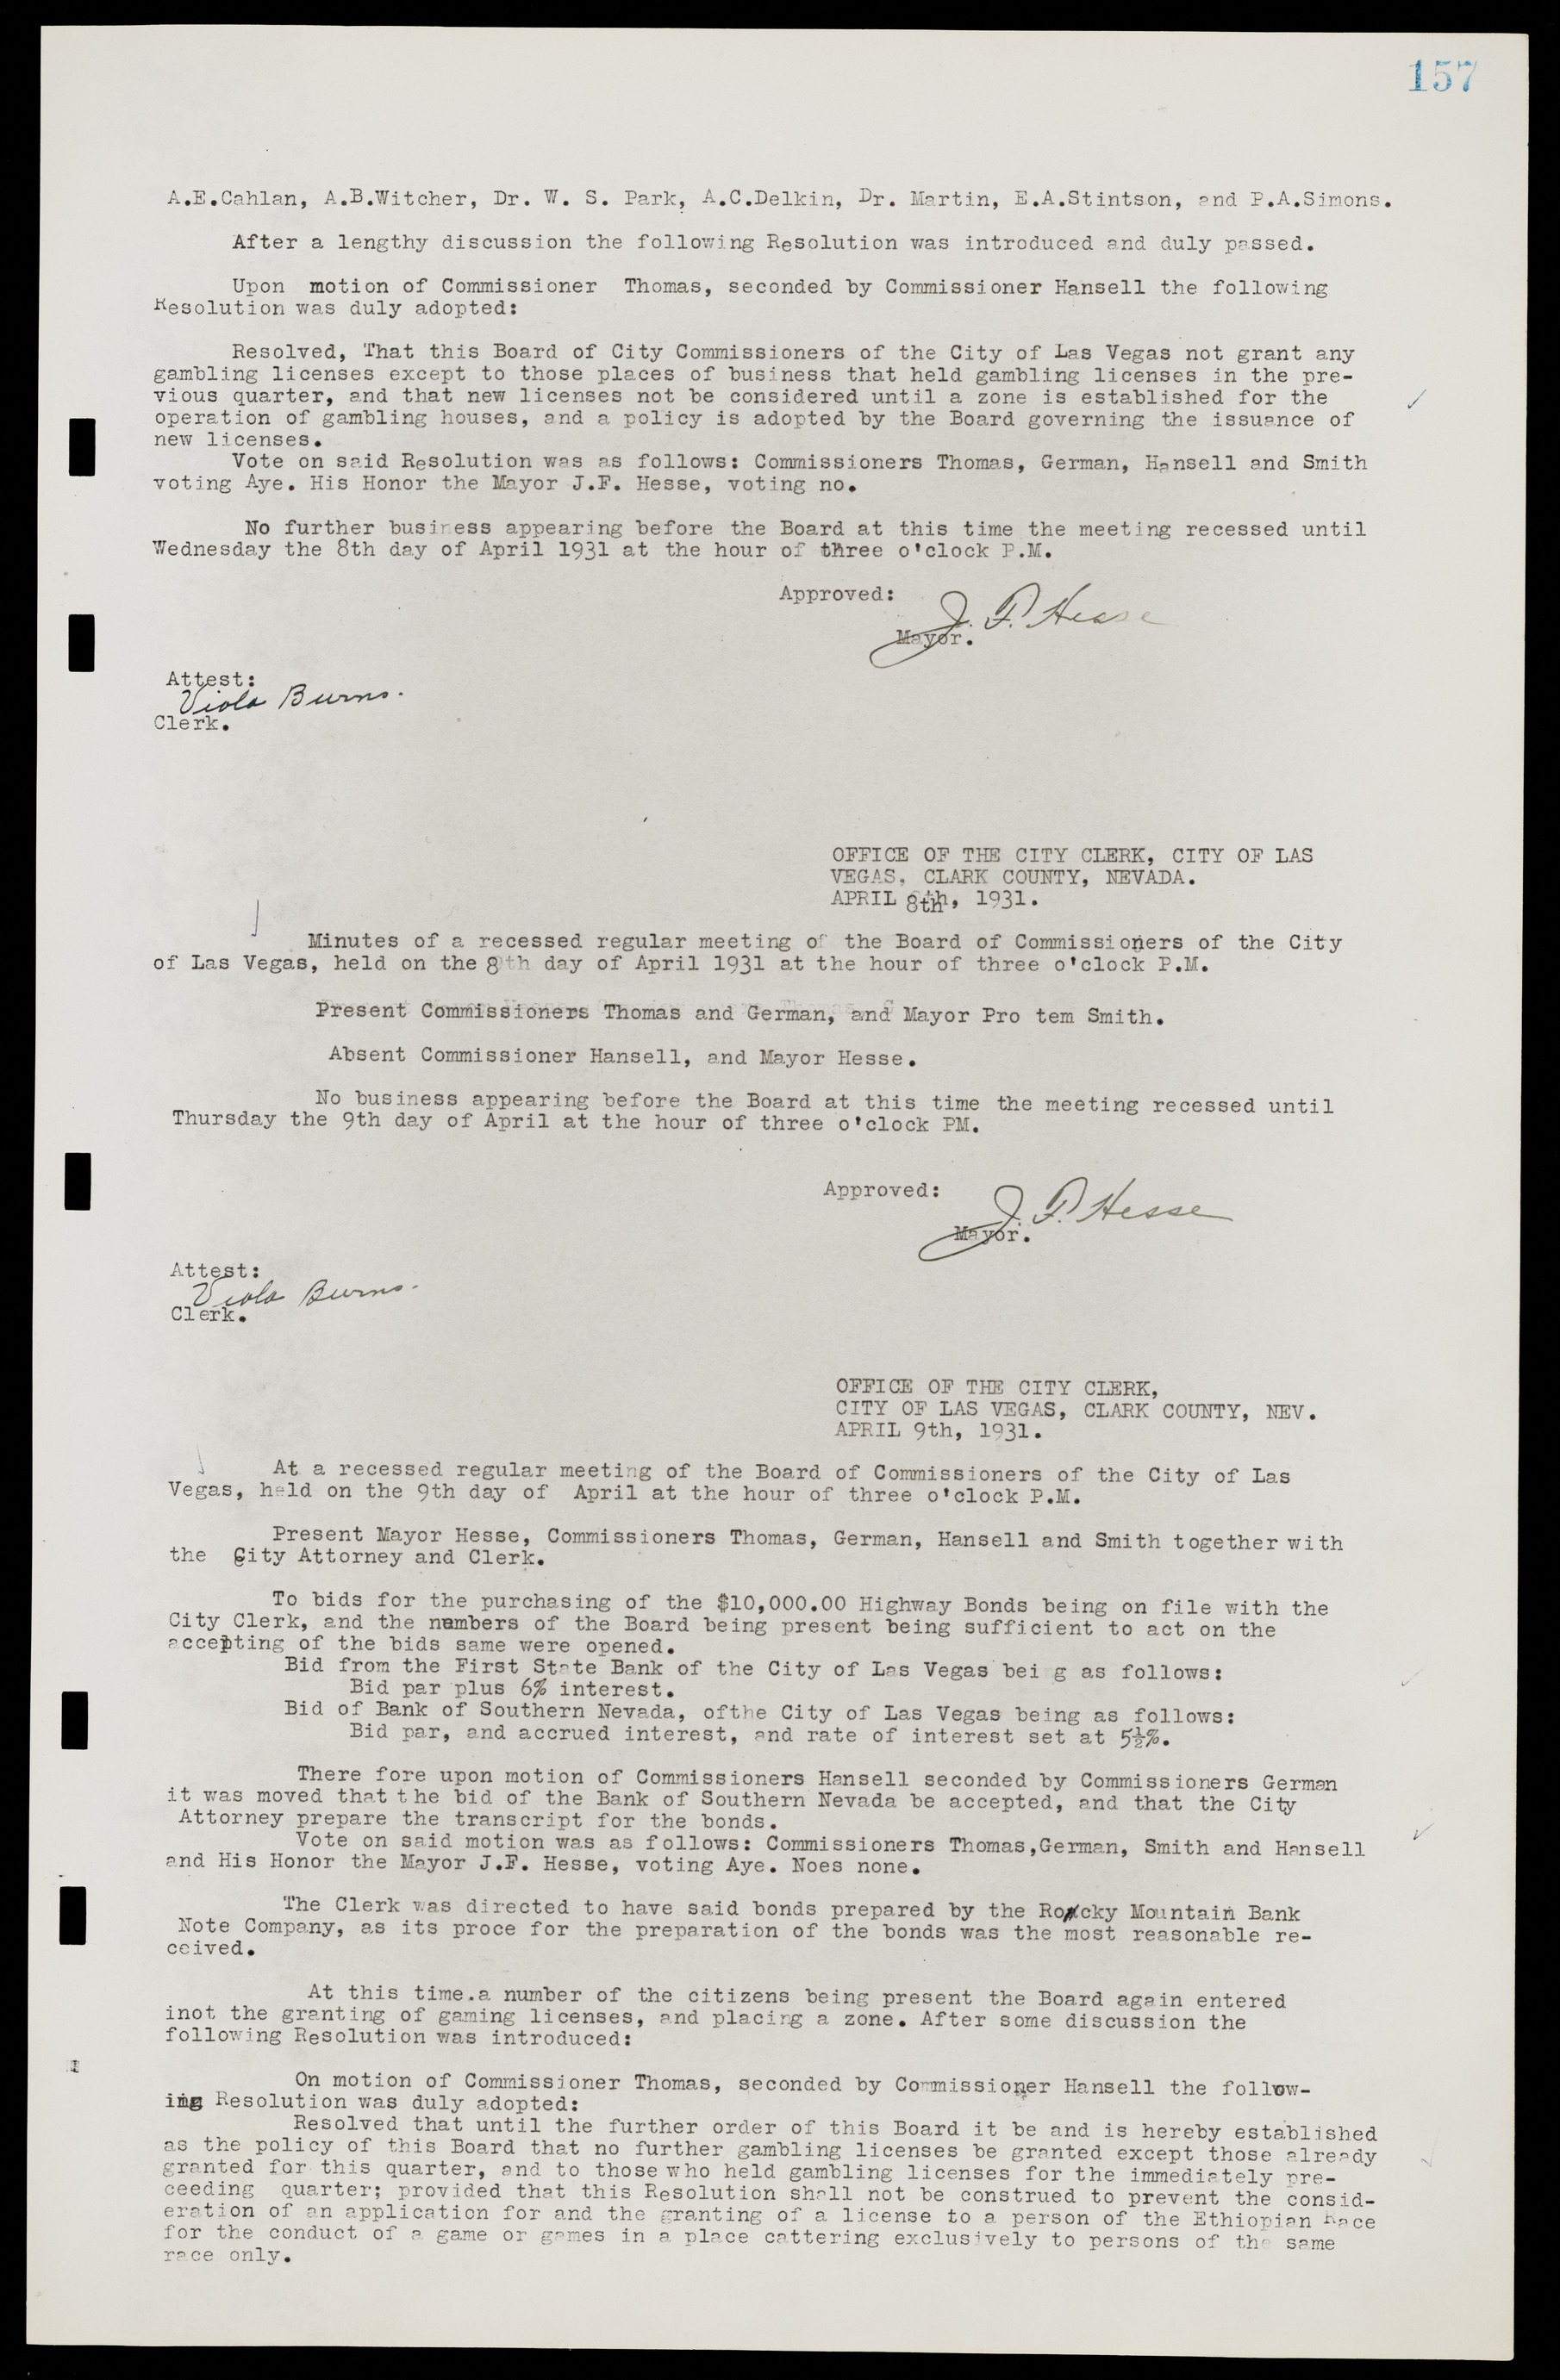 Las Vegas City Commission Minutes, May 14, 1929 to February 11, 1937, lvc000003-163